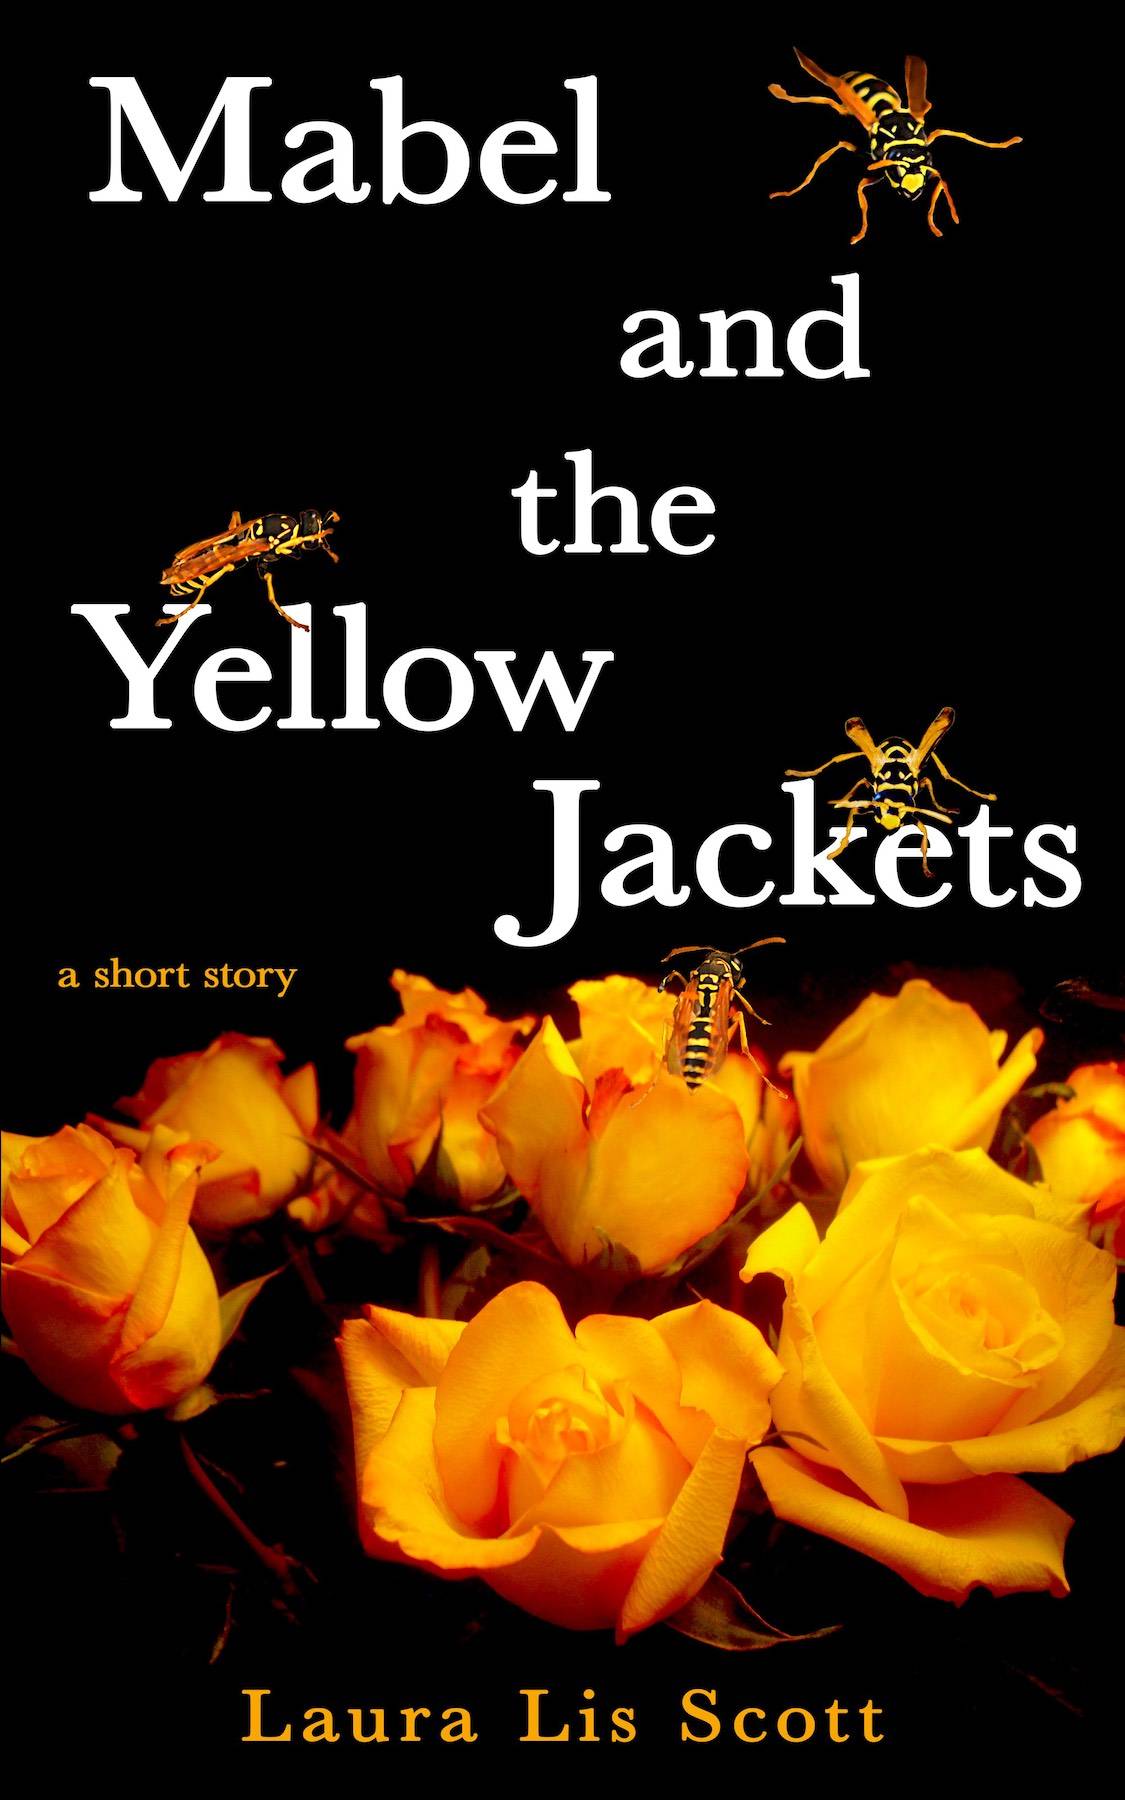 Mabel and the Yellow Jackets